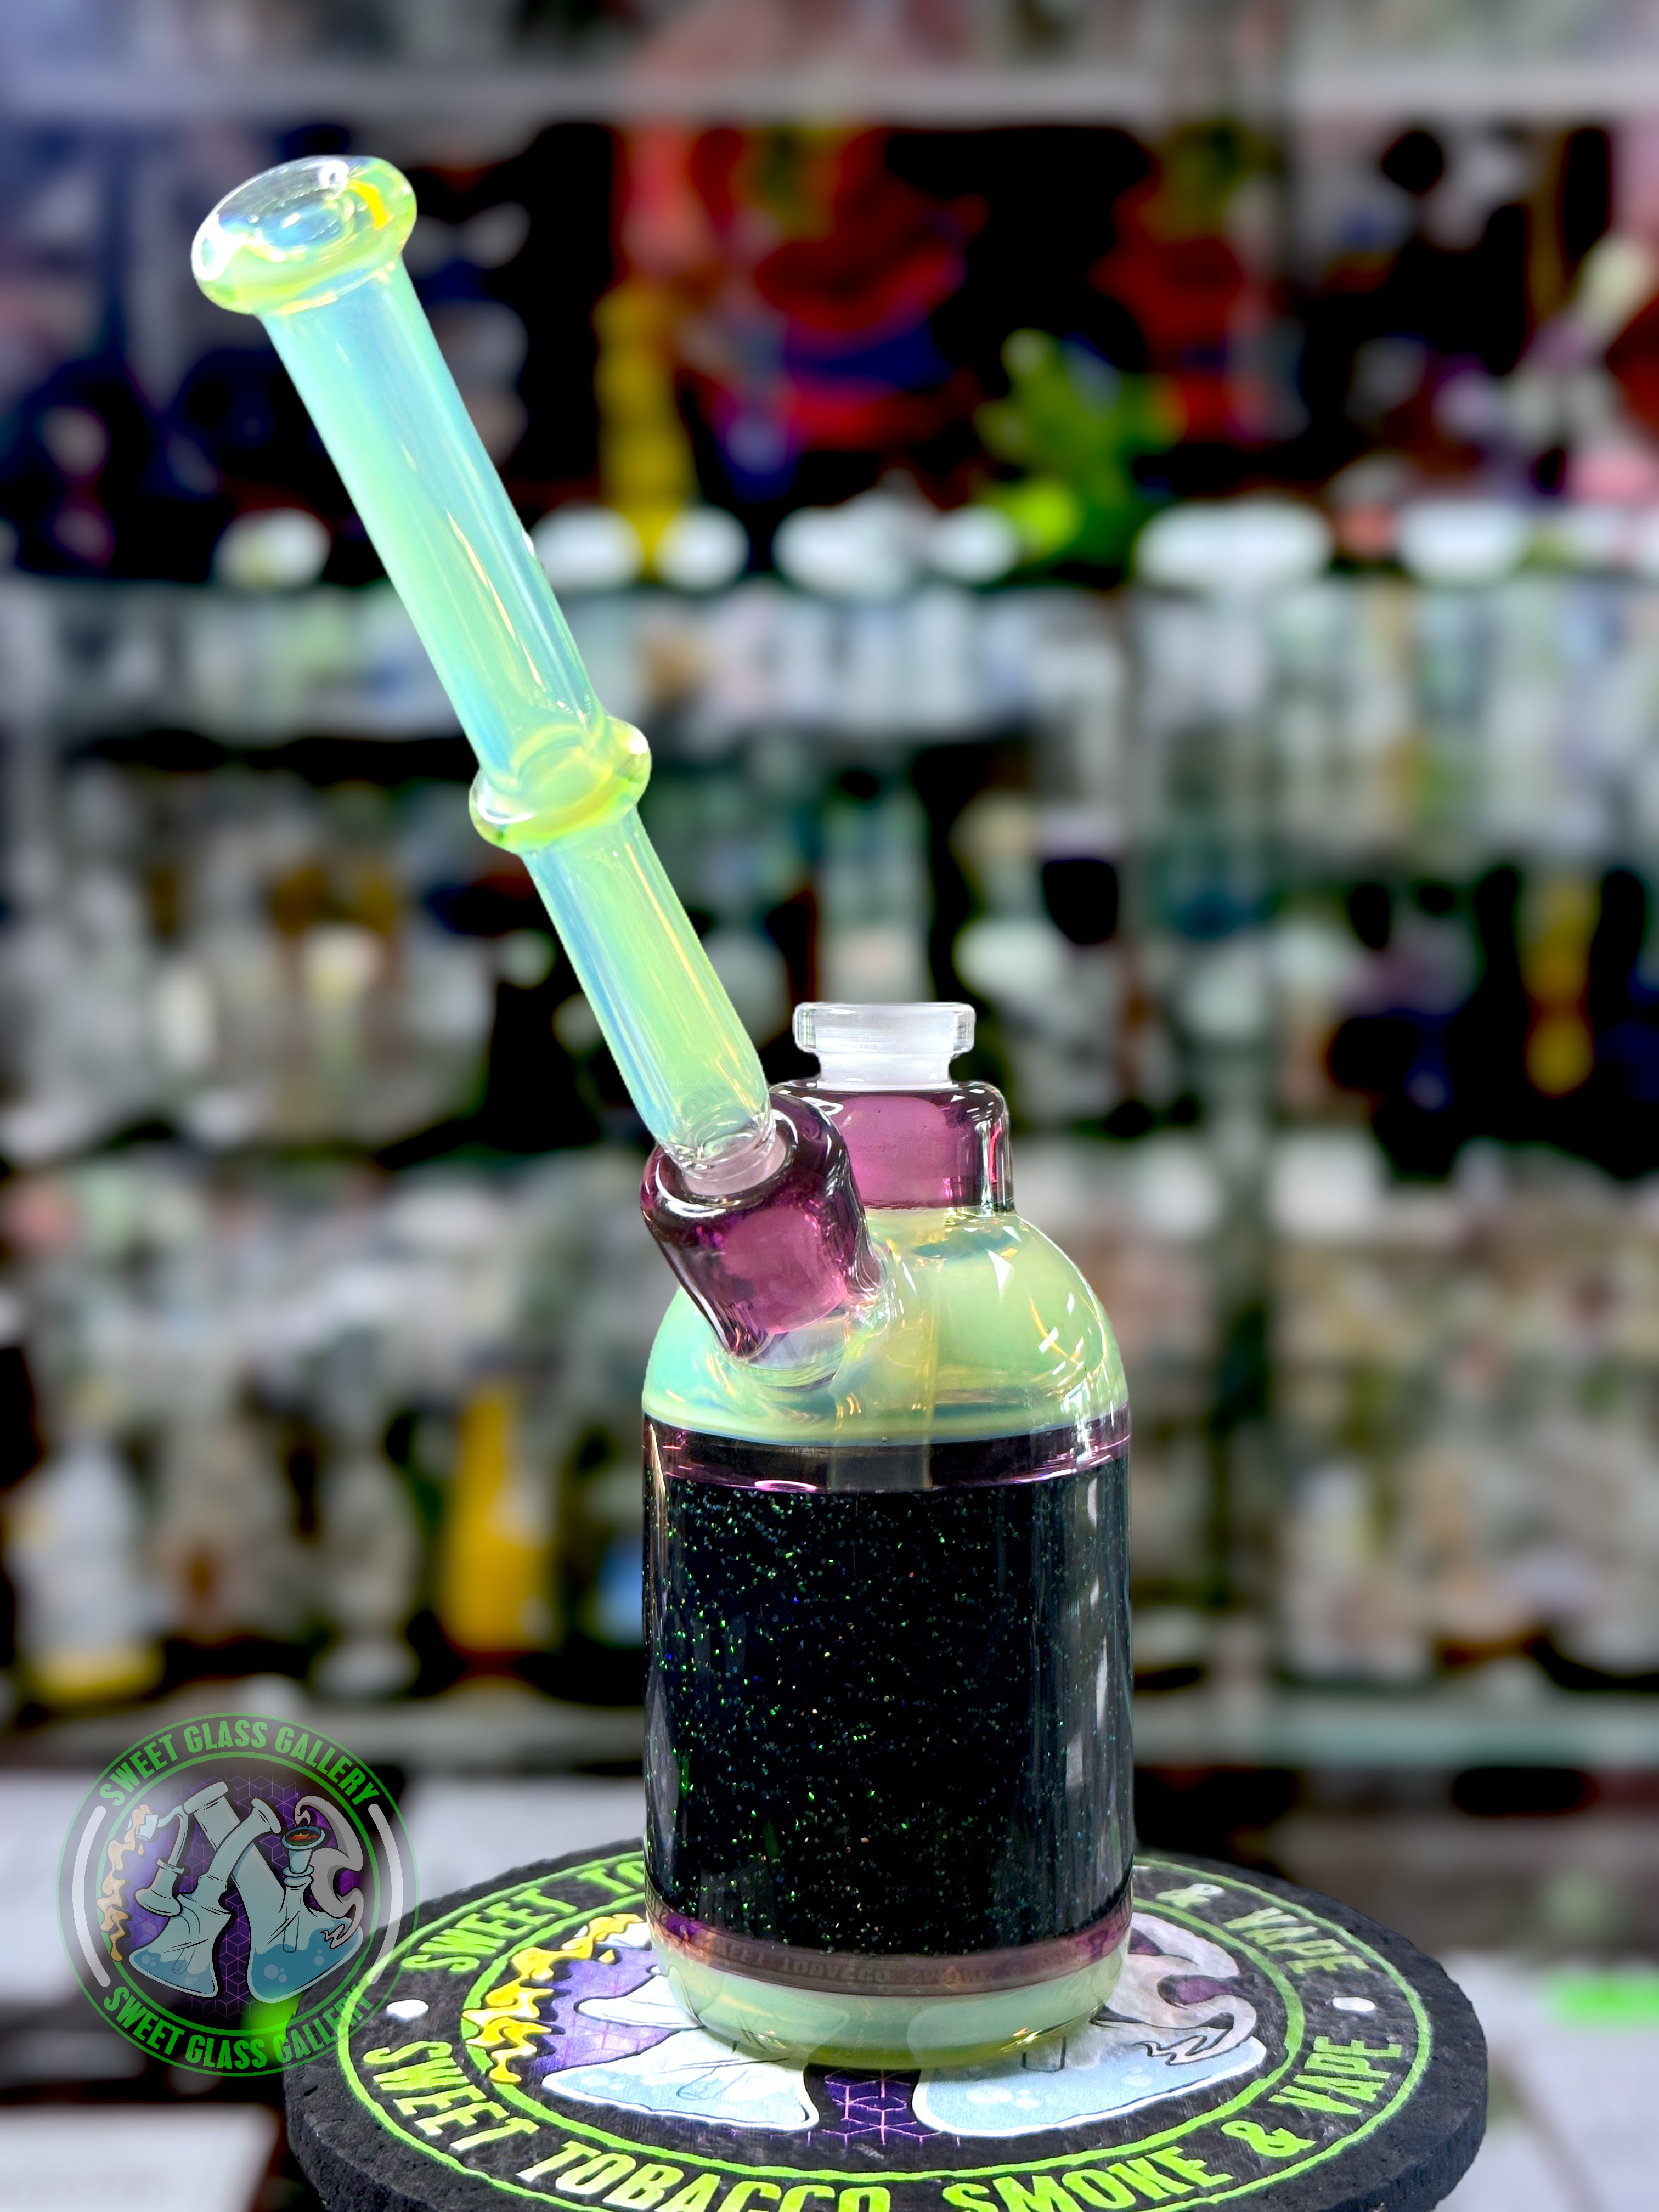 Chachie Rodriguez - Crushed Opal Dab Chali Cup Rig